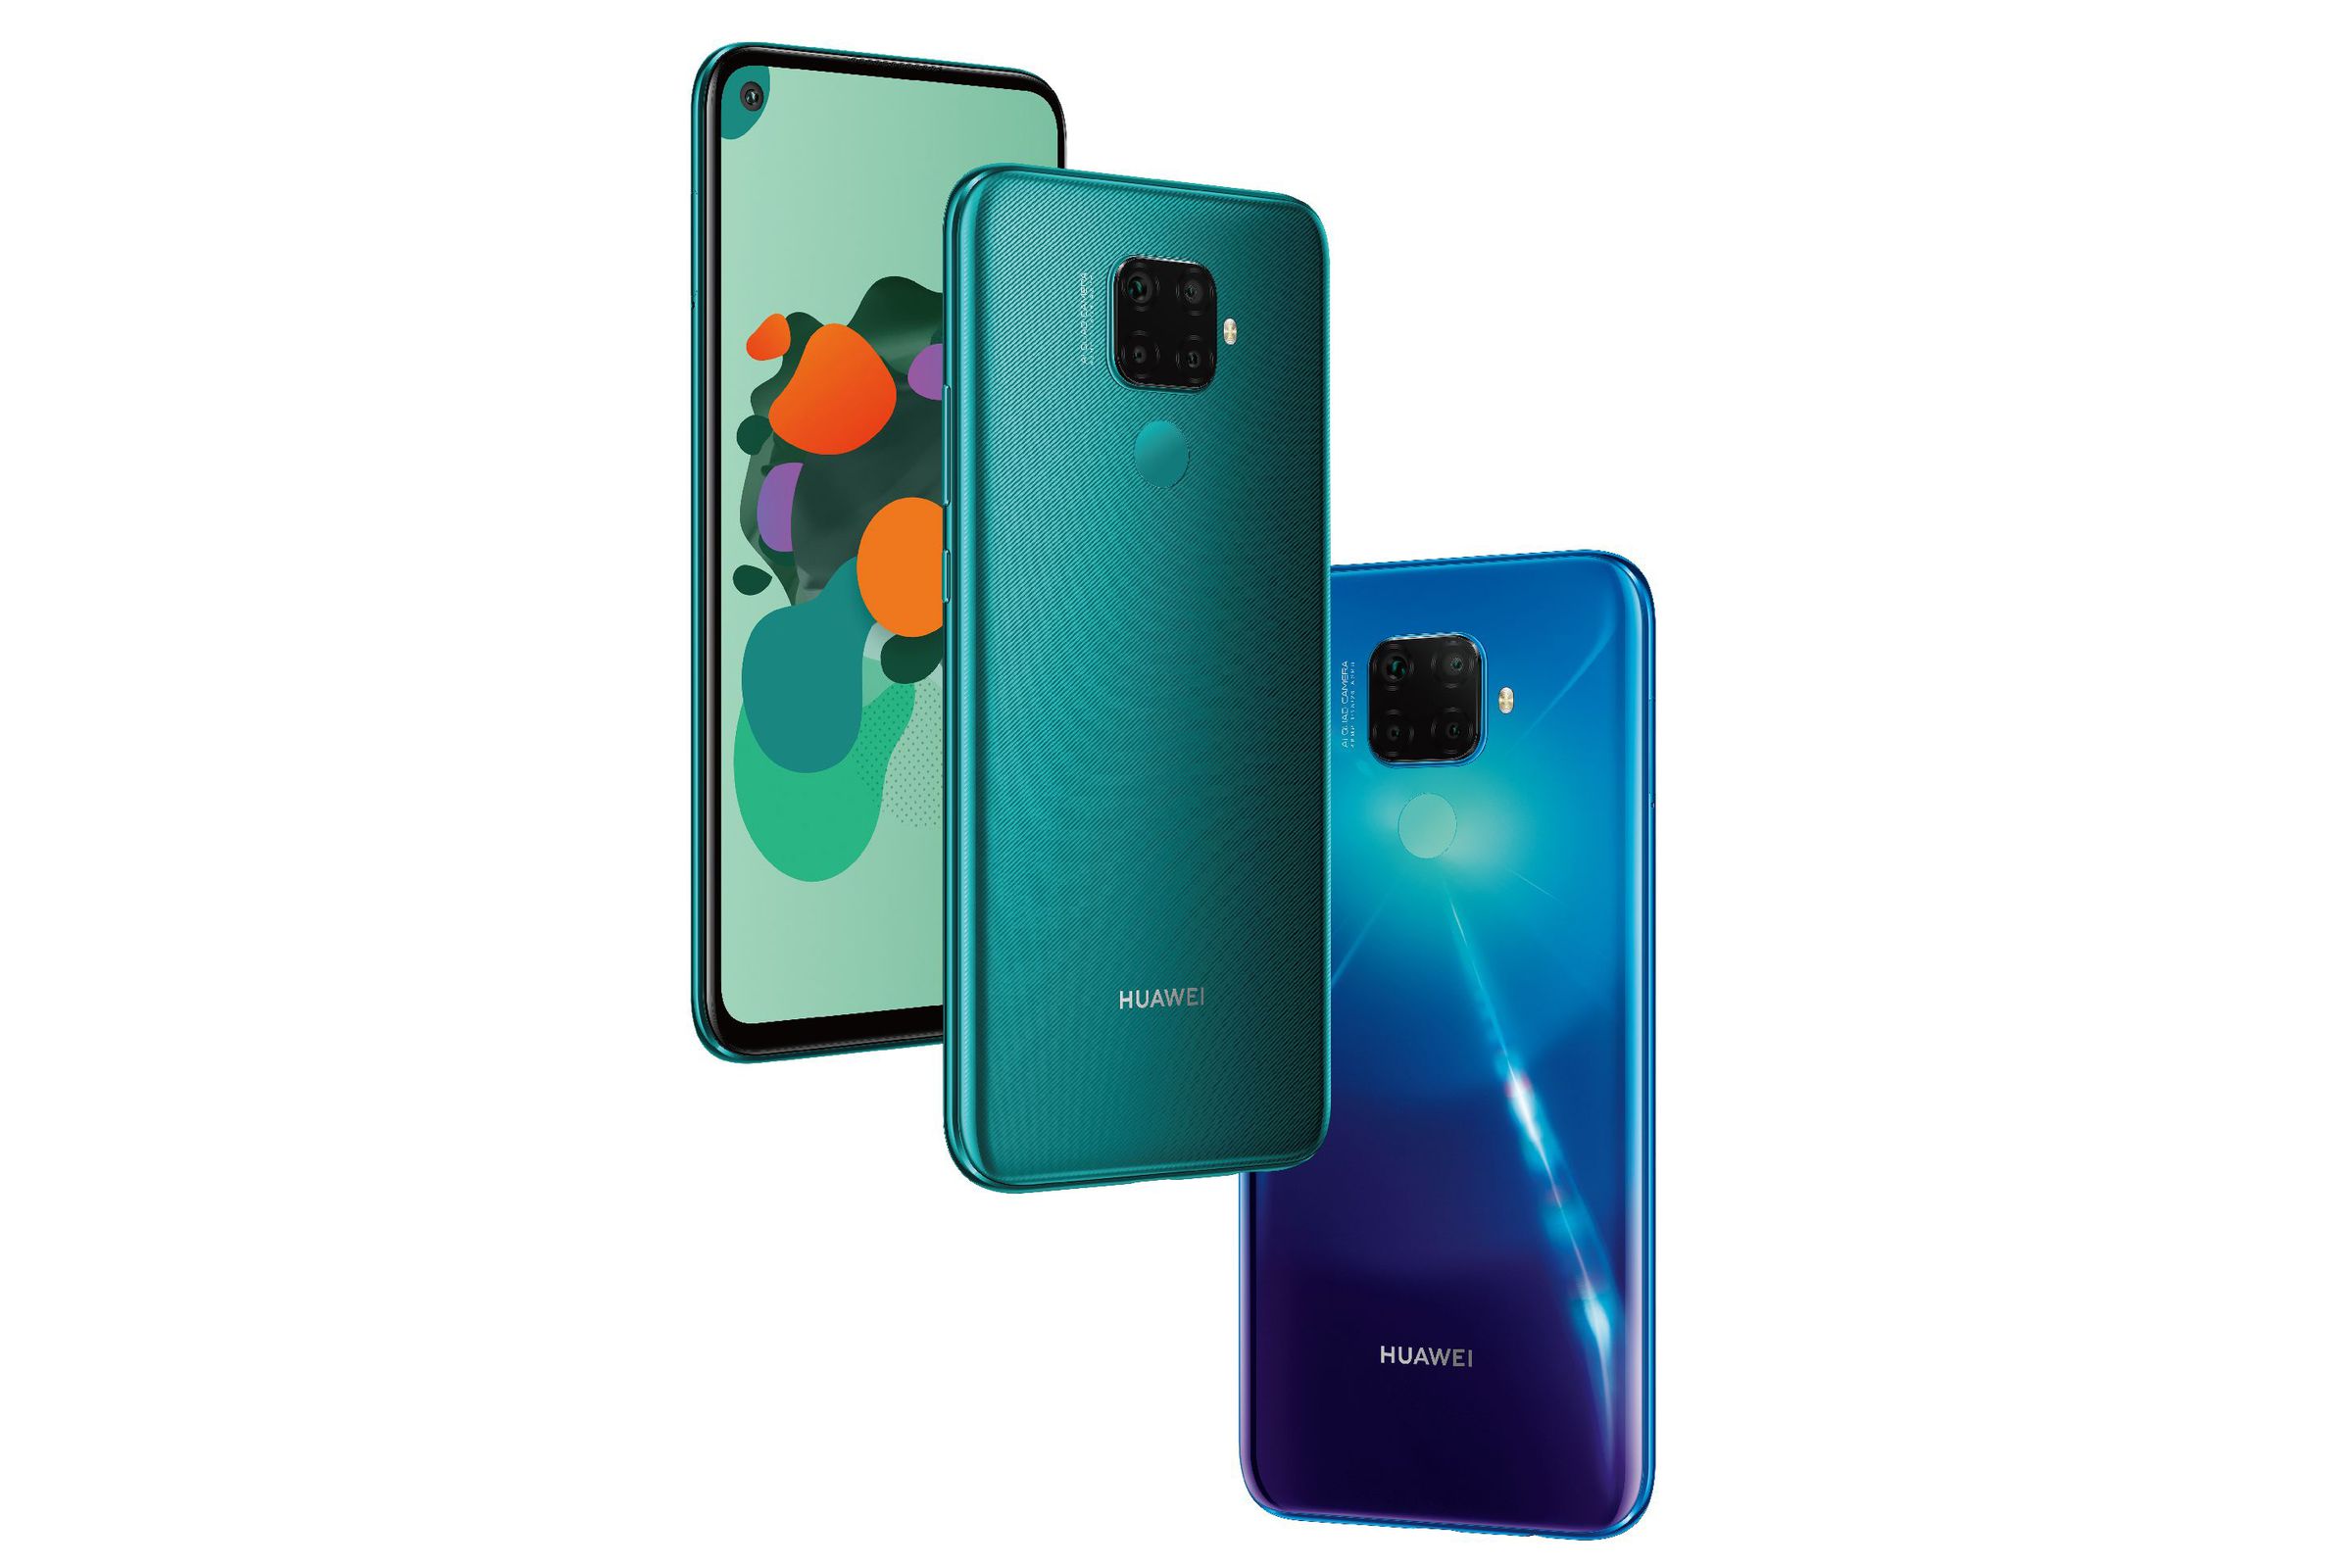 The Mate 30 Lite is allegedly the same as Huawei’s Nova 5i Pro that it announced back in July.